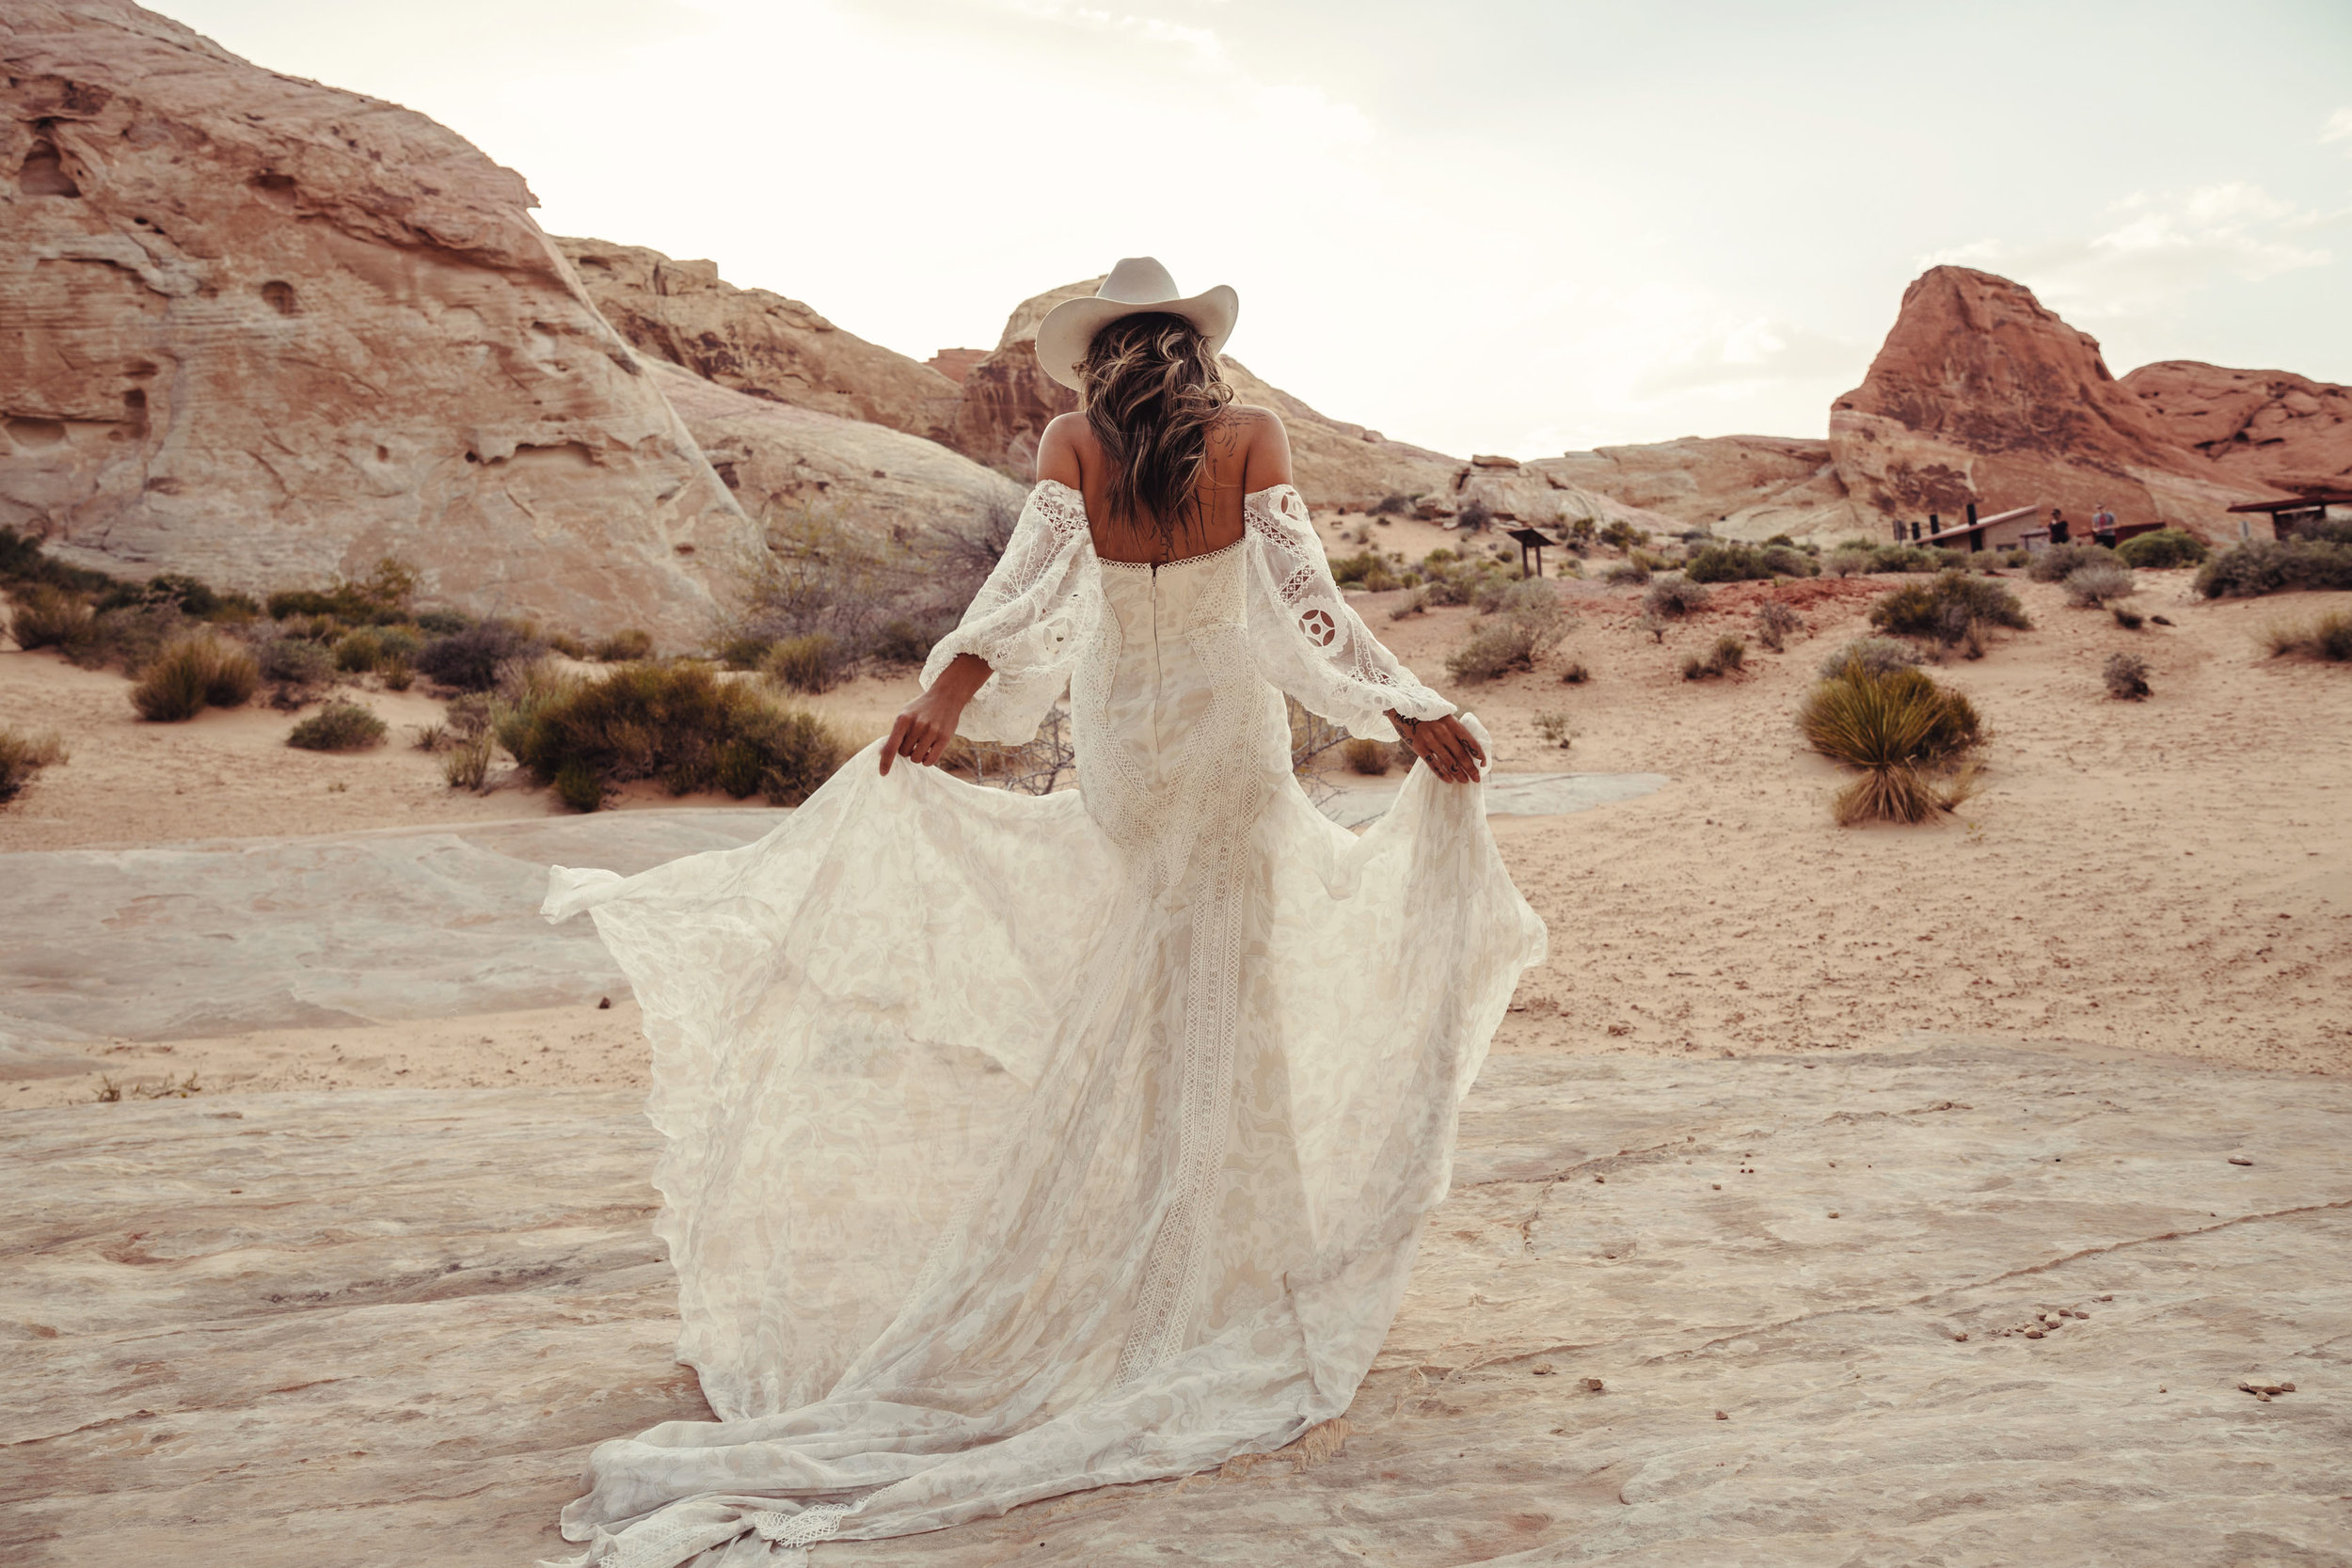  River Gown | Rue De Seine | Rue De Seine Bridal | Moonrise Canyon Collection 2019 | wild west inspired | free spirited bride | bohemian | modern bride | boho wedding | boho bride | wedding gown | bridal gown | bustier gown, fitted bodice, attachable